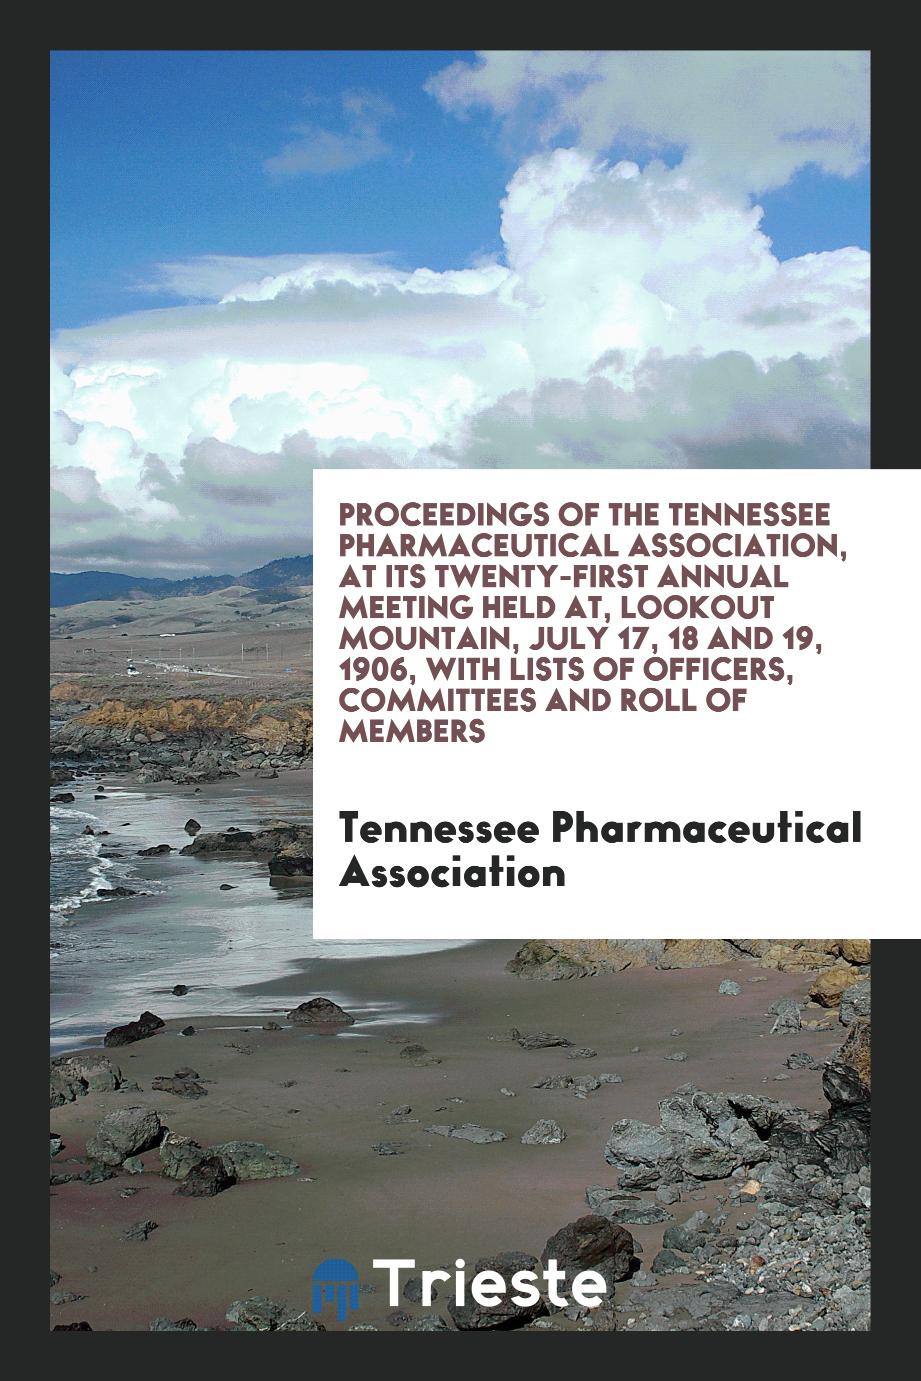 Proceedings of the Tennessee Pharmaceutical Association, at Its Twenty-First Annual Meeting Held at, Lookout Mountain, July 17, 18 and 19, 1906, with Lists of Officers, Committees and Roll of Members